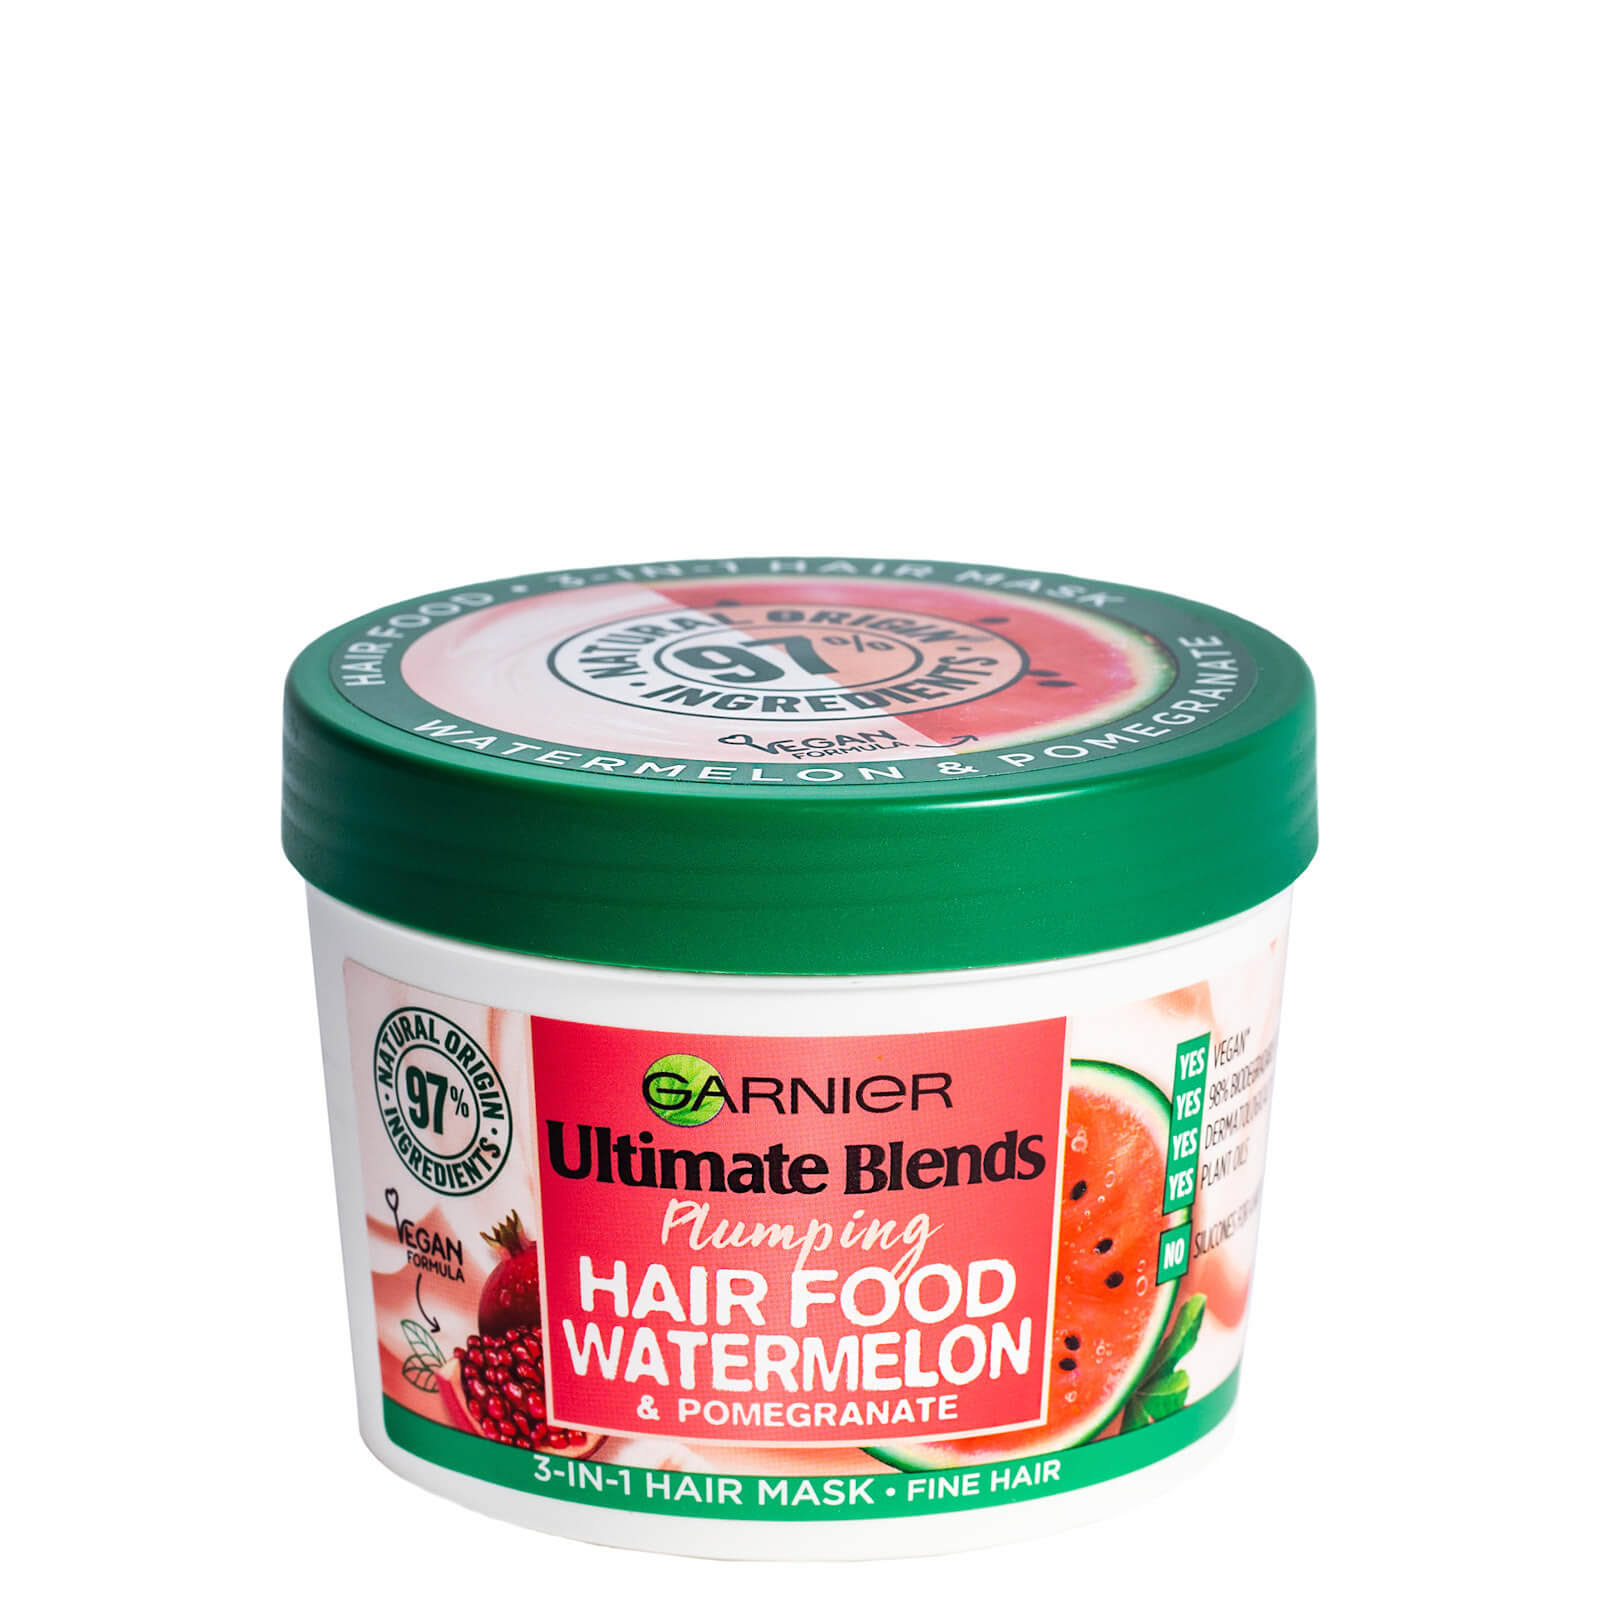 Garnier Ultimate Blends Hairfood Mask Watermelon 3 in 1 | Hair Care